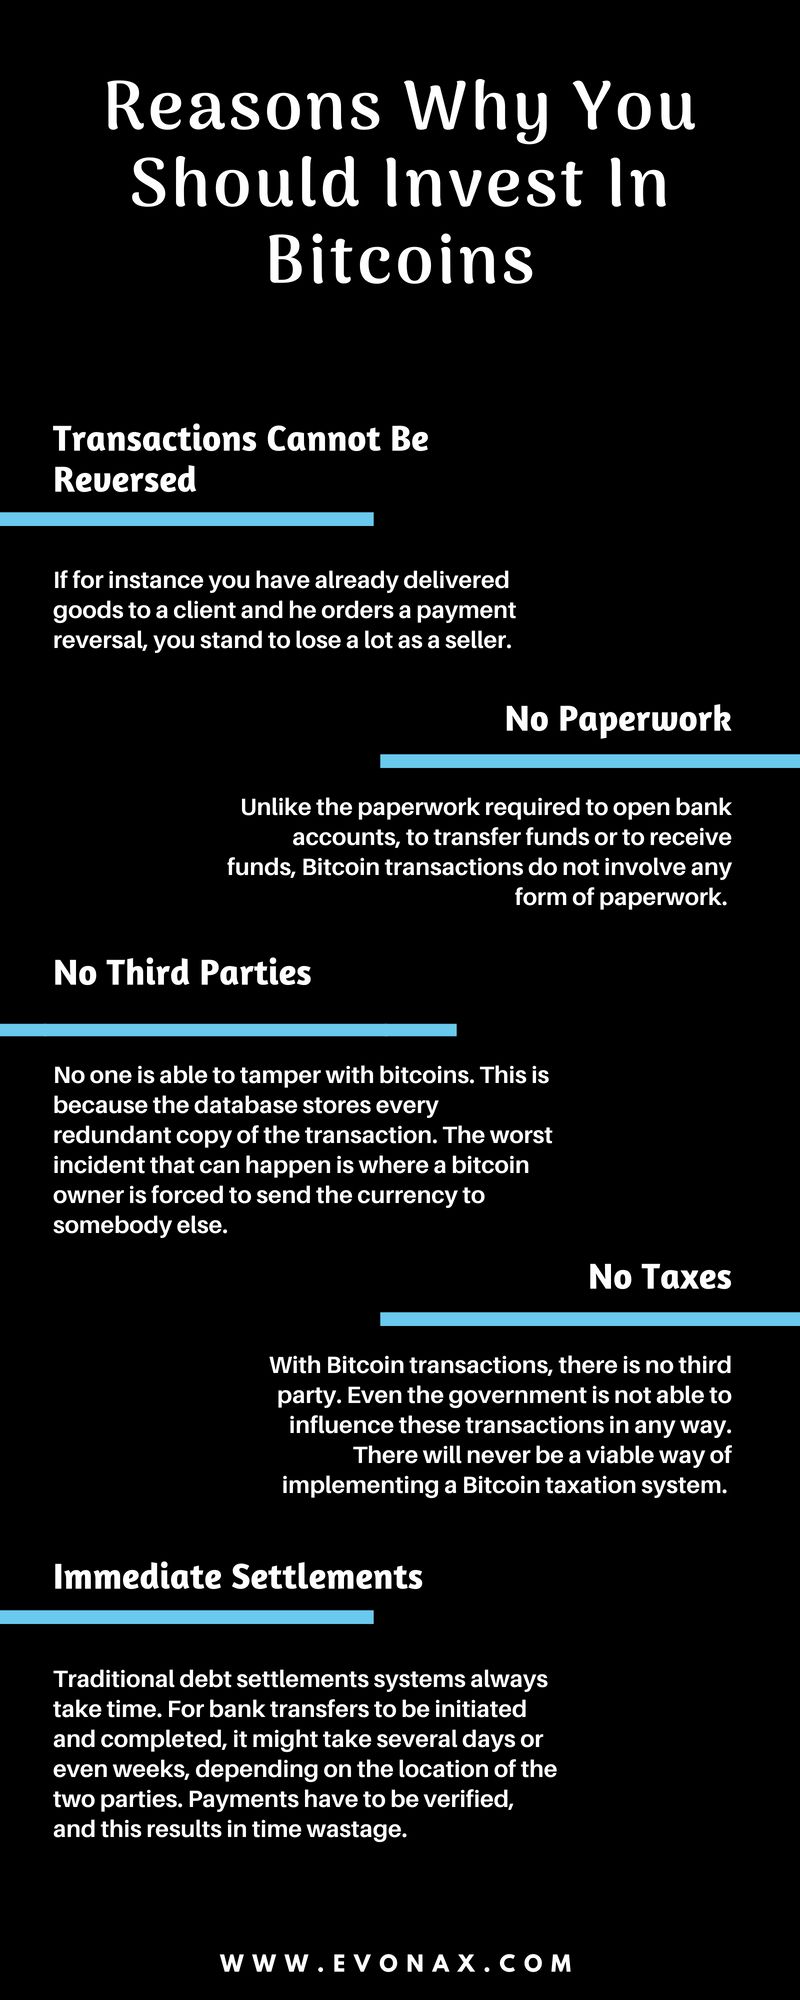 Top 5 Reasons Why You Should Invest in Bitcoin